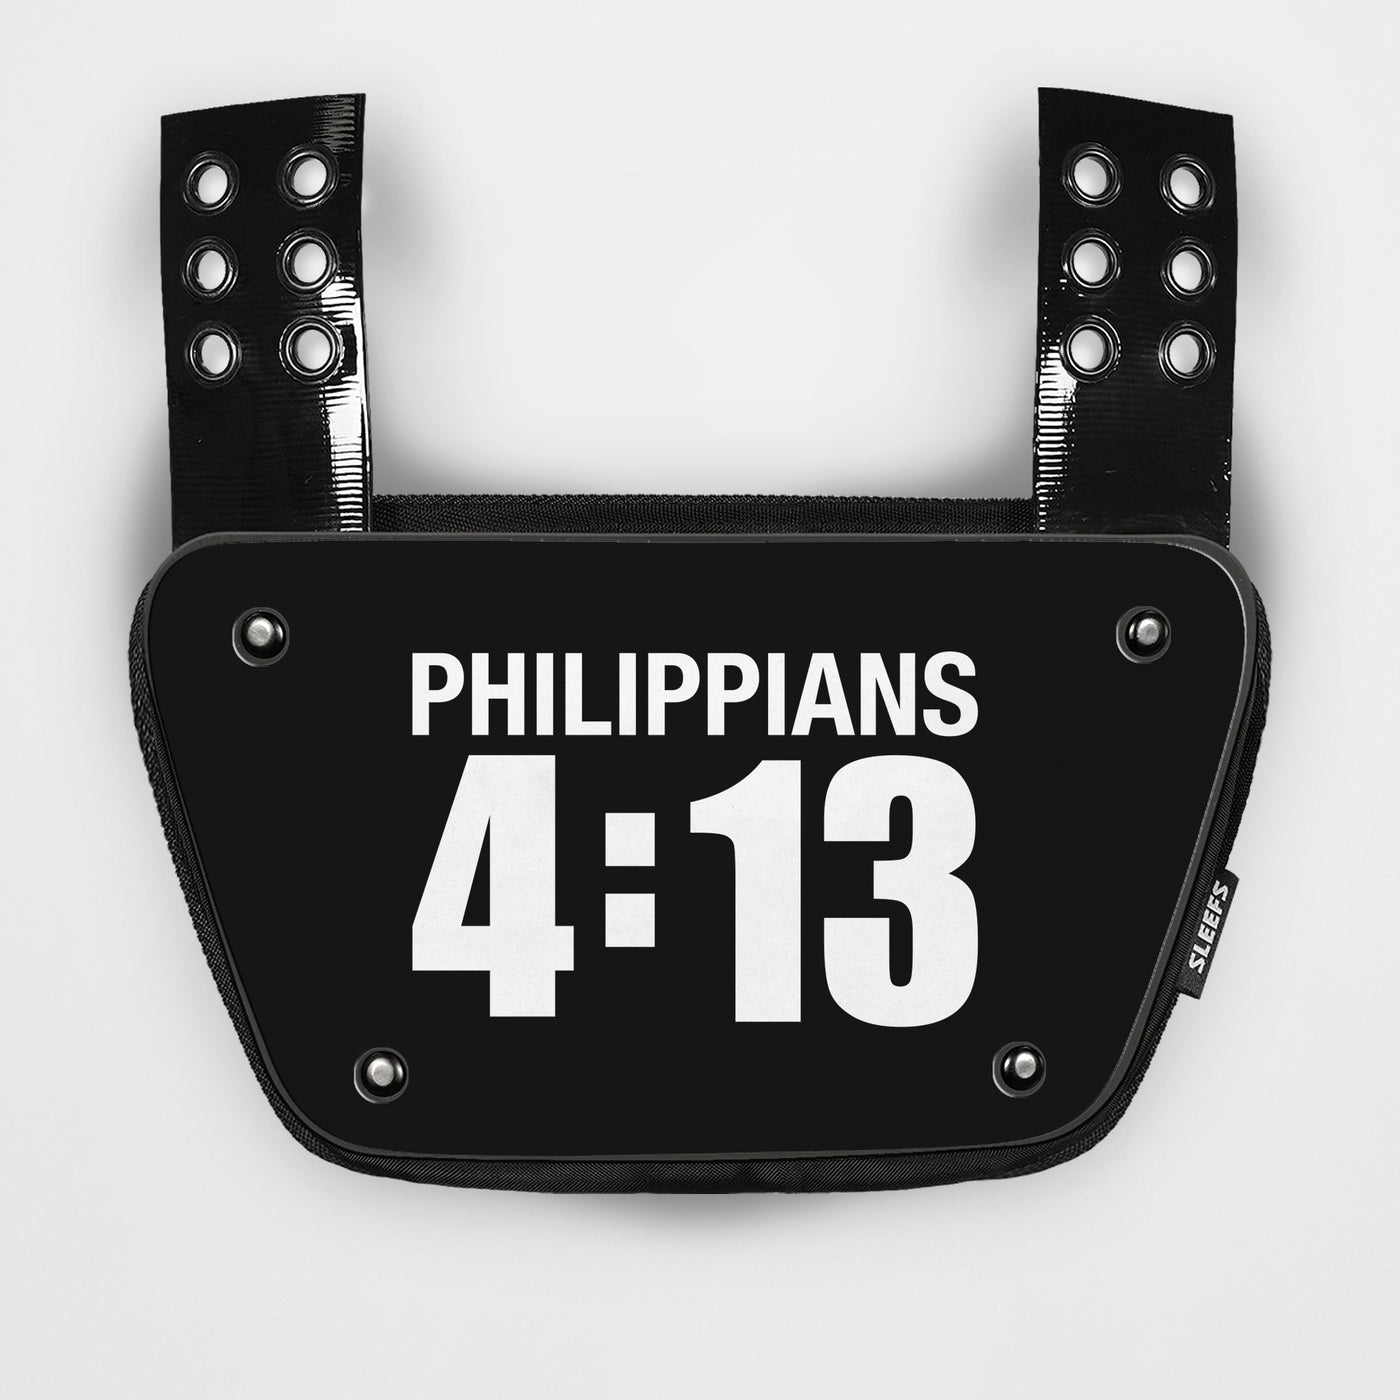 Philippians 4:13 Sticker for Back Plate